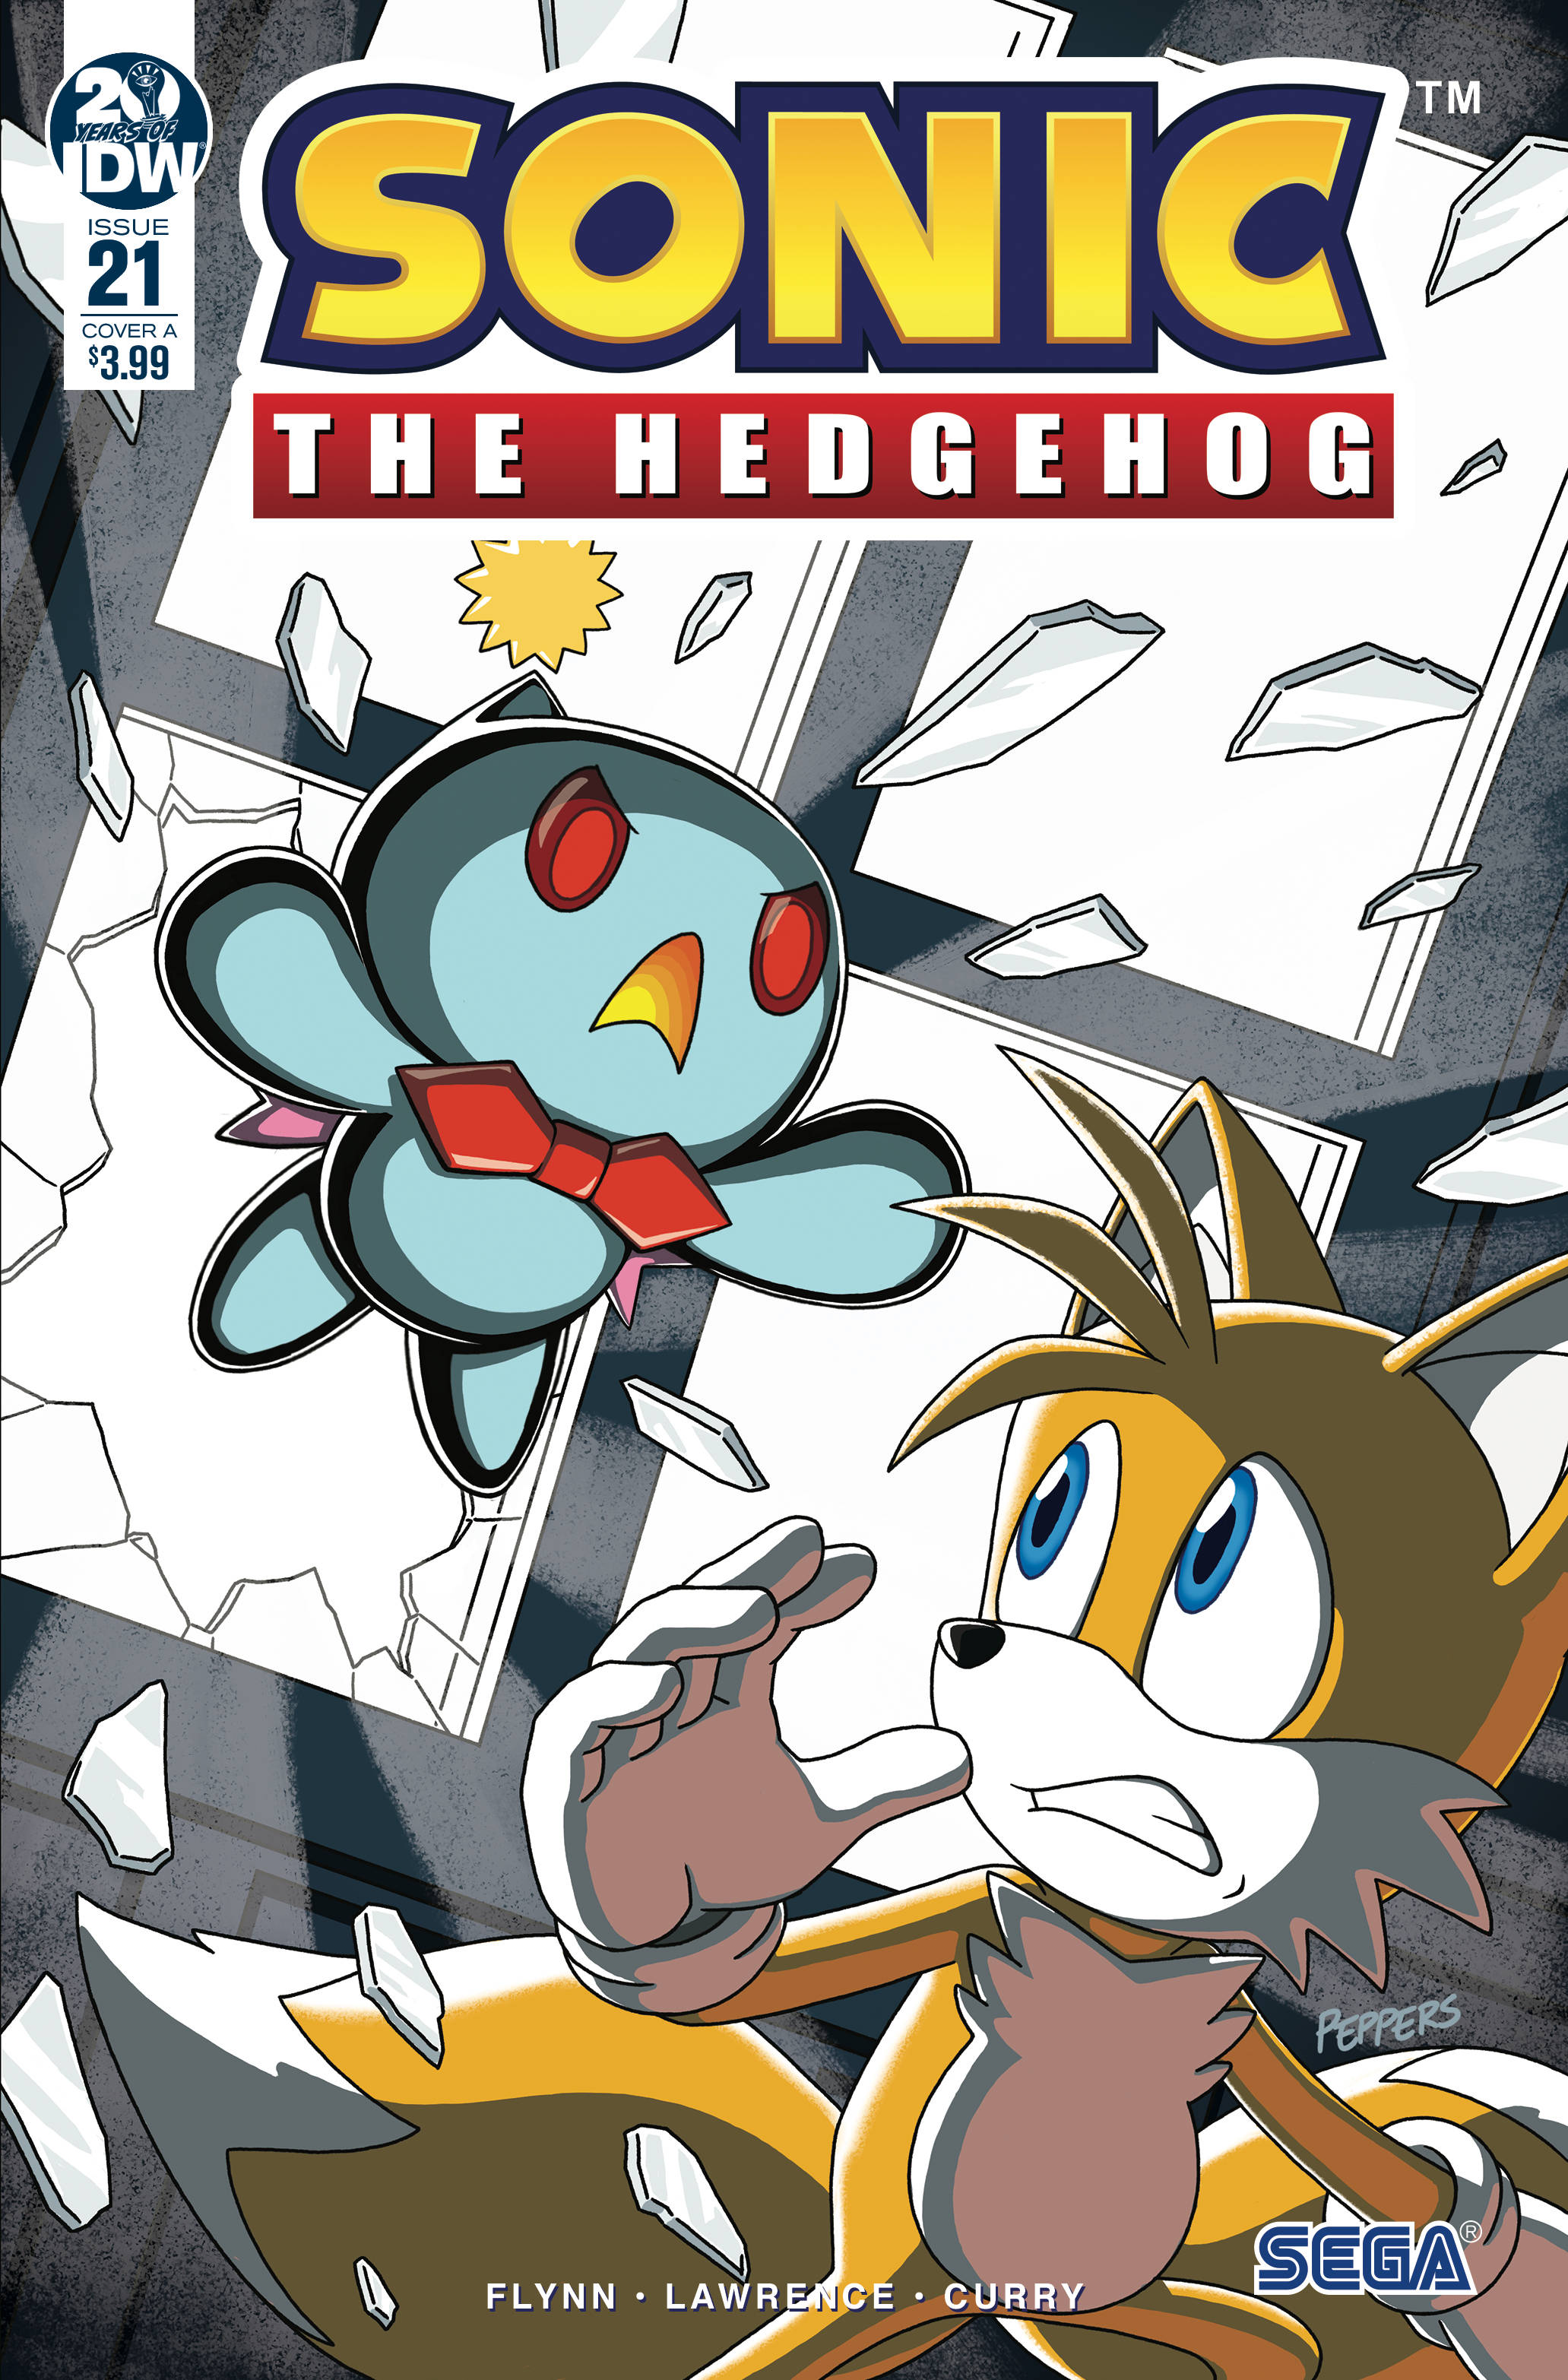 Sonic the Hedgehog #21 Cover A Hammerstrom